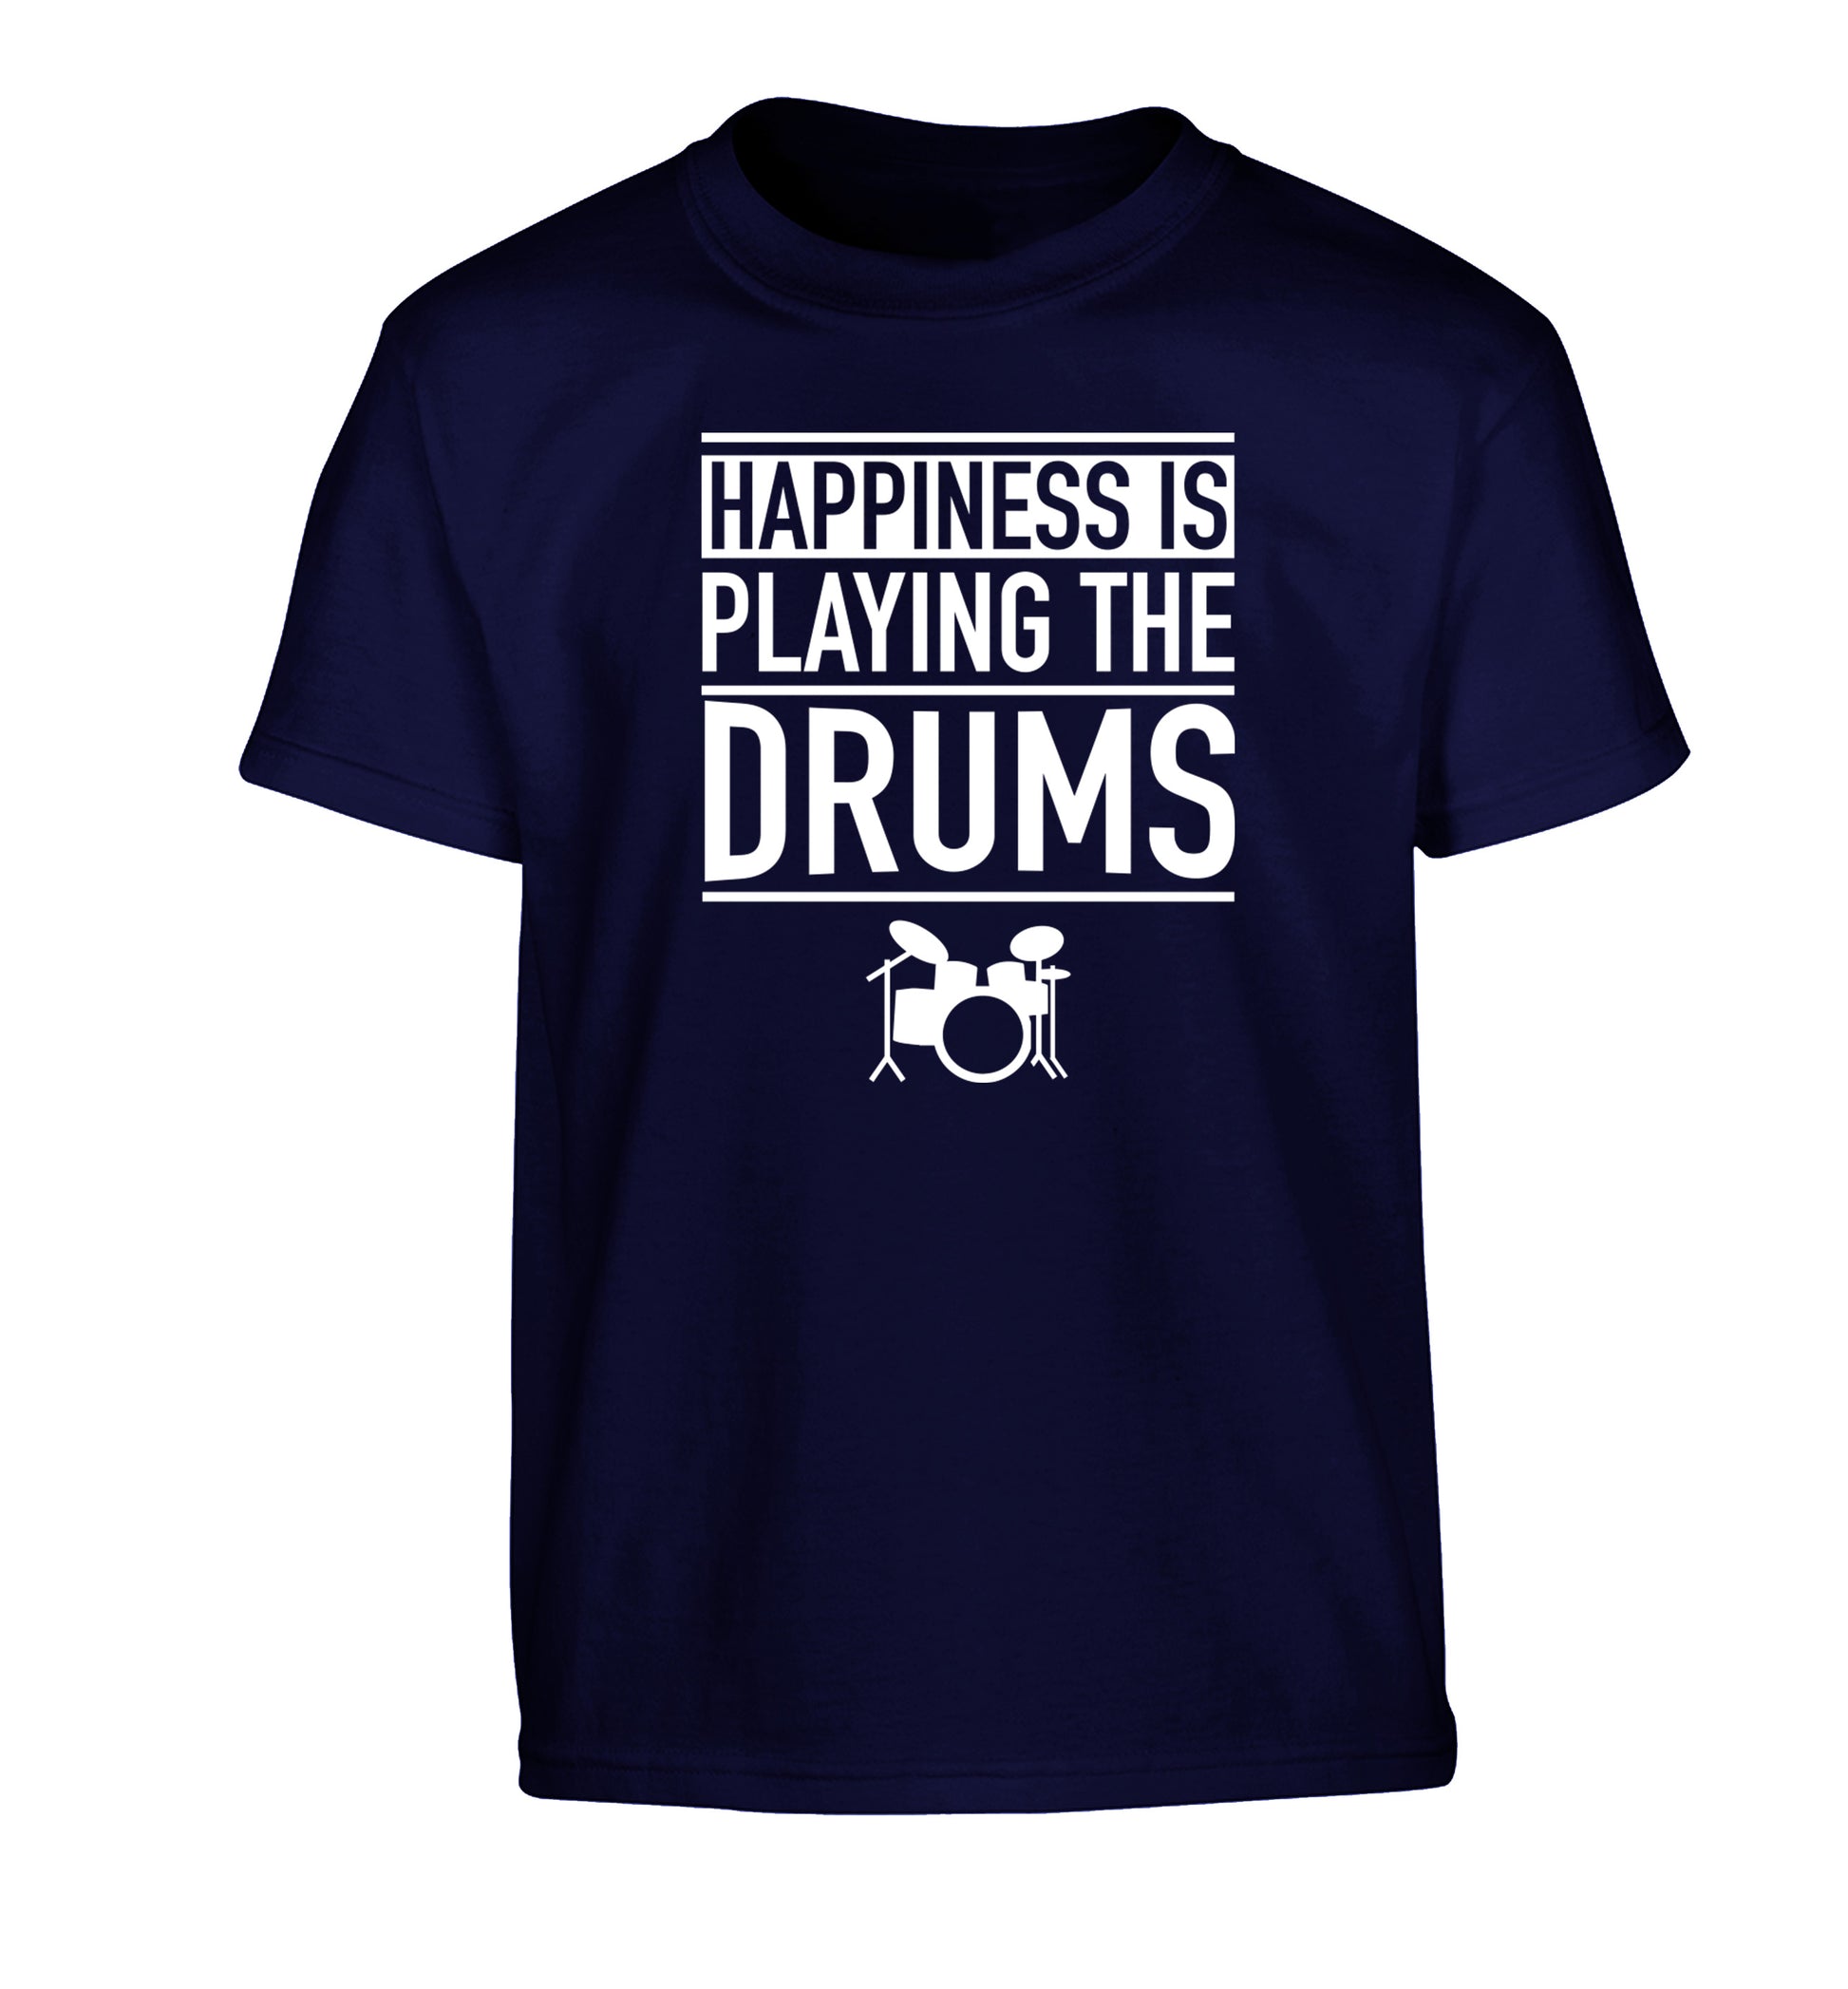 Happiness is playing the drums Children's navy Tshirt 12-14 Years